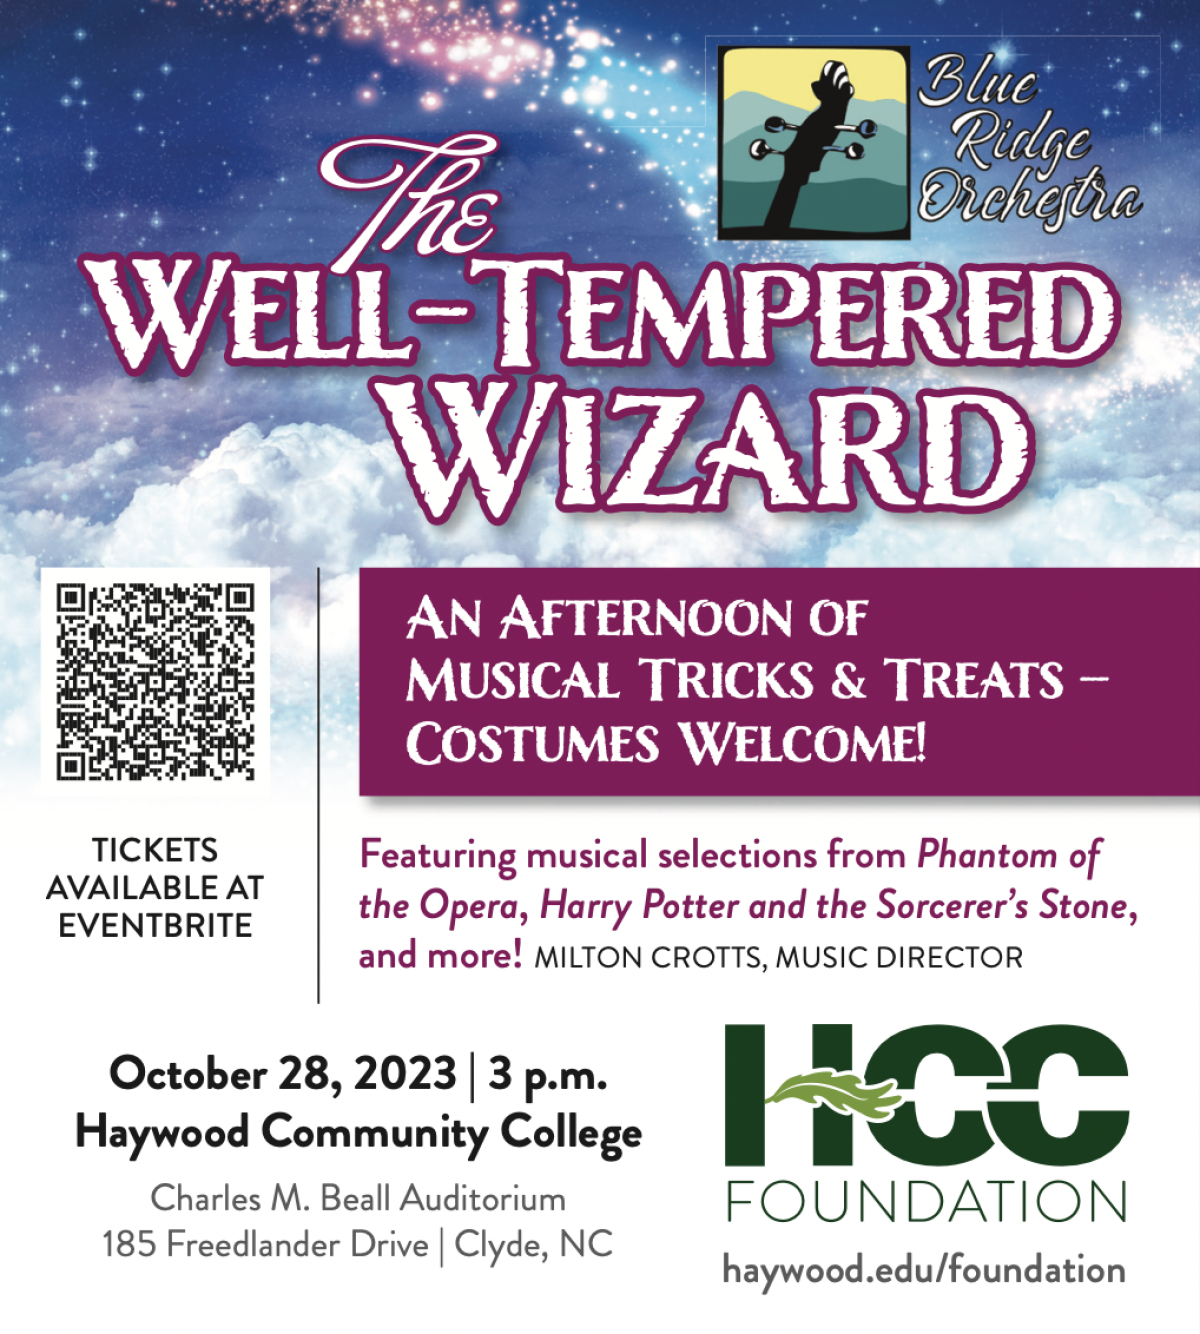 Haywood Community College Foundation hosts fall concert to support Haywood Strong Scholarship